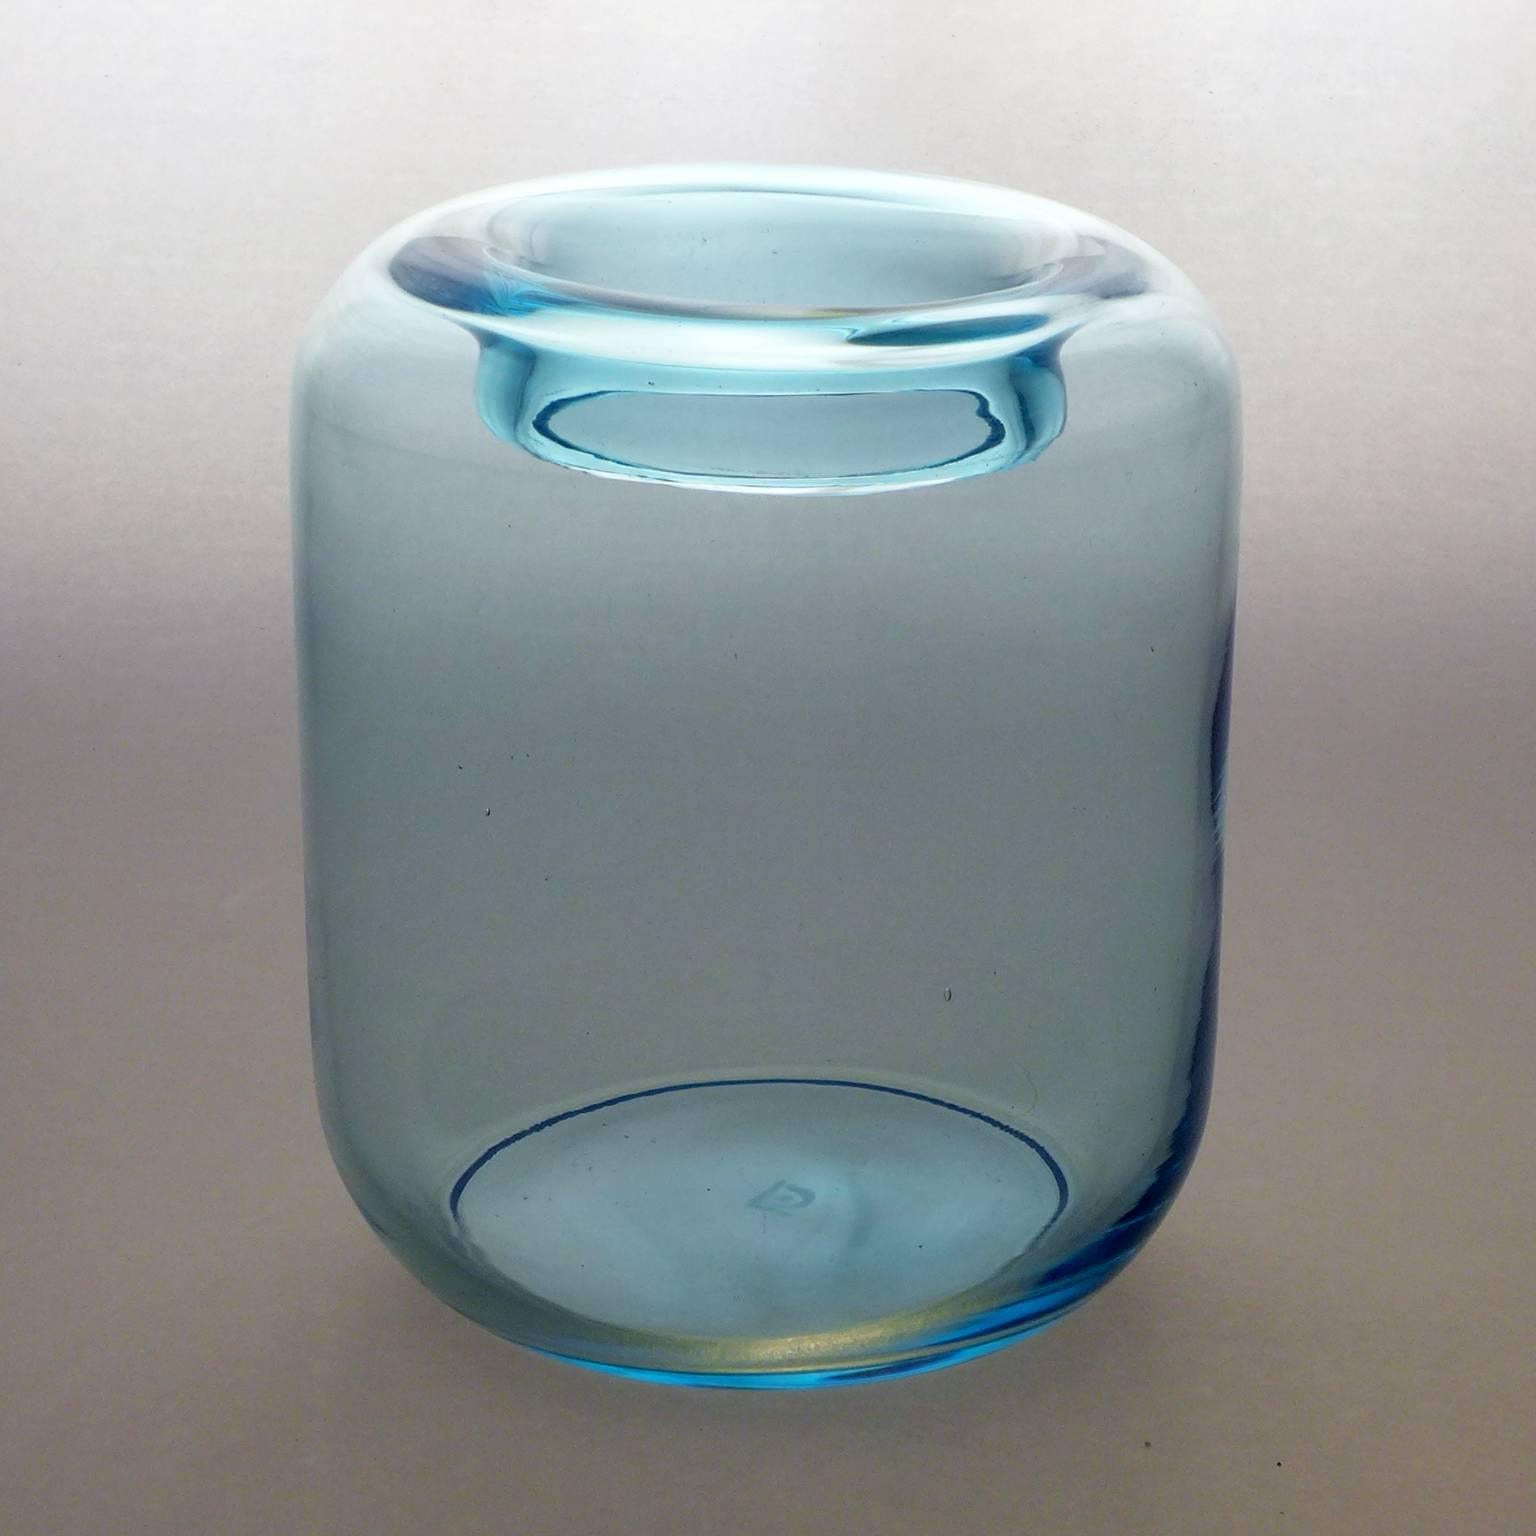 Cool blue Art Deco vase with inverted rim by A. D. Copier/ Signed CL produced at Royal Leerdam Glassworks, circa 1940. Andries Dirk Copier is one of the most revered glass designers of his time, a leader in the Art Deco 'Amsterdam School' style.